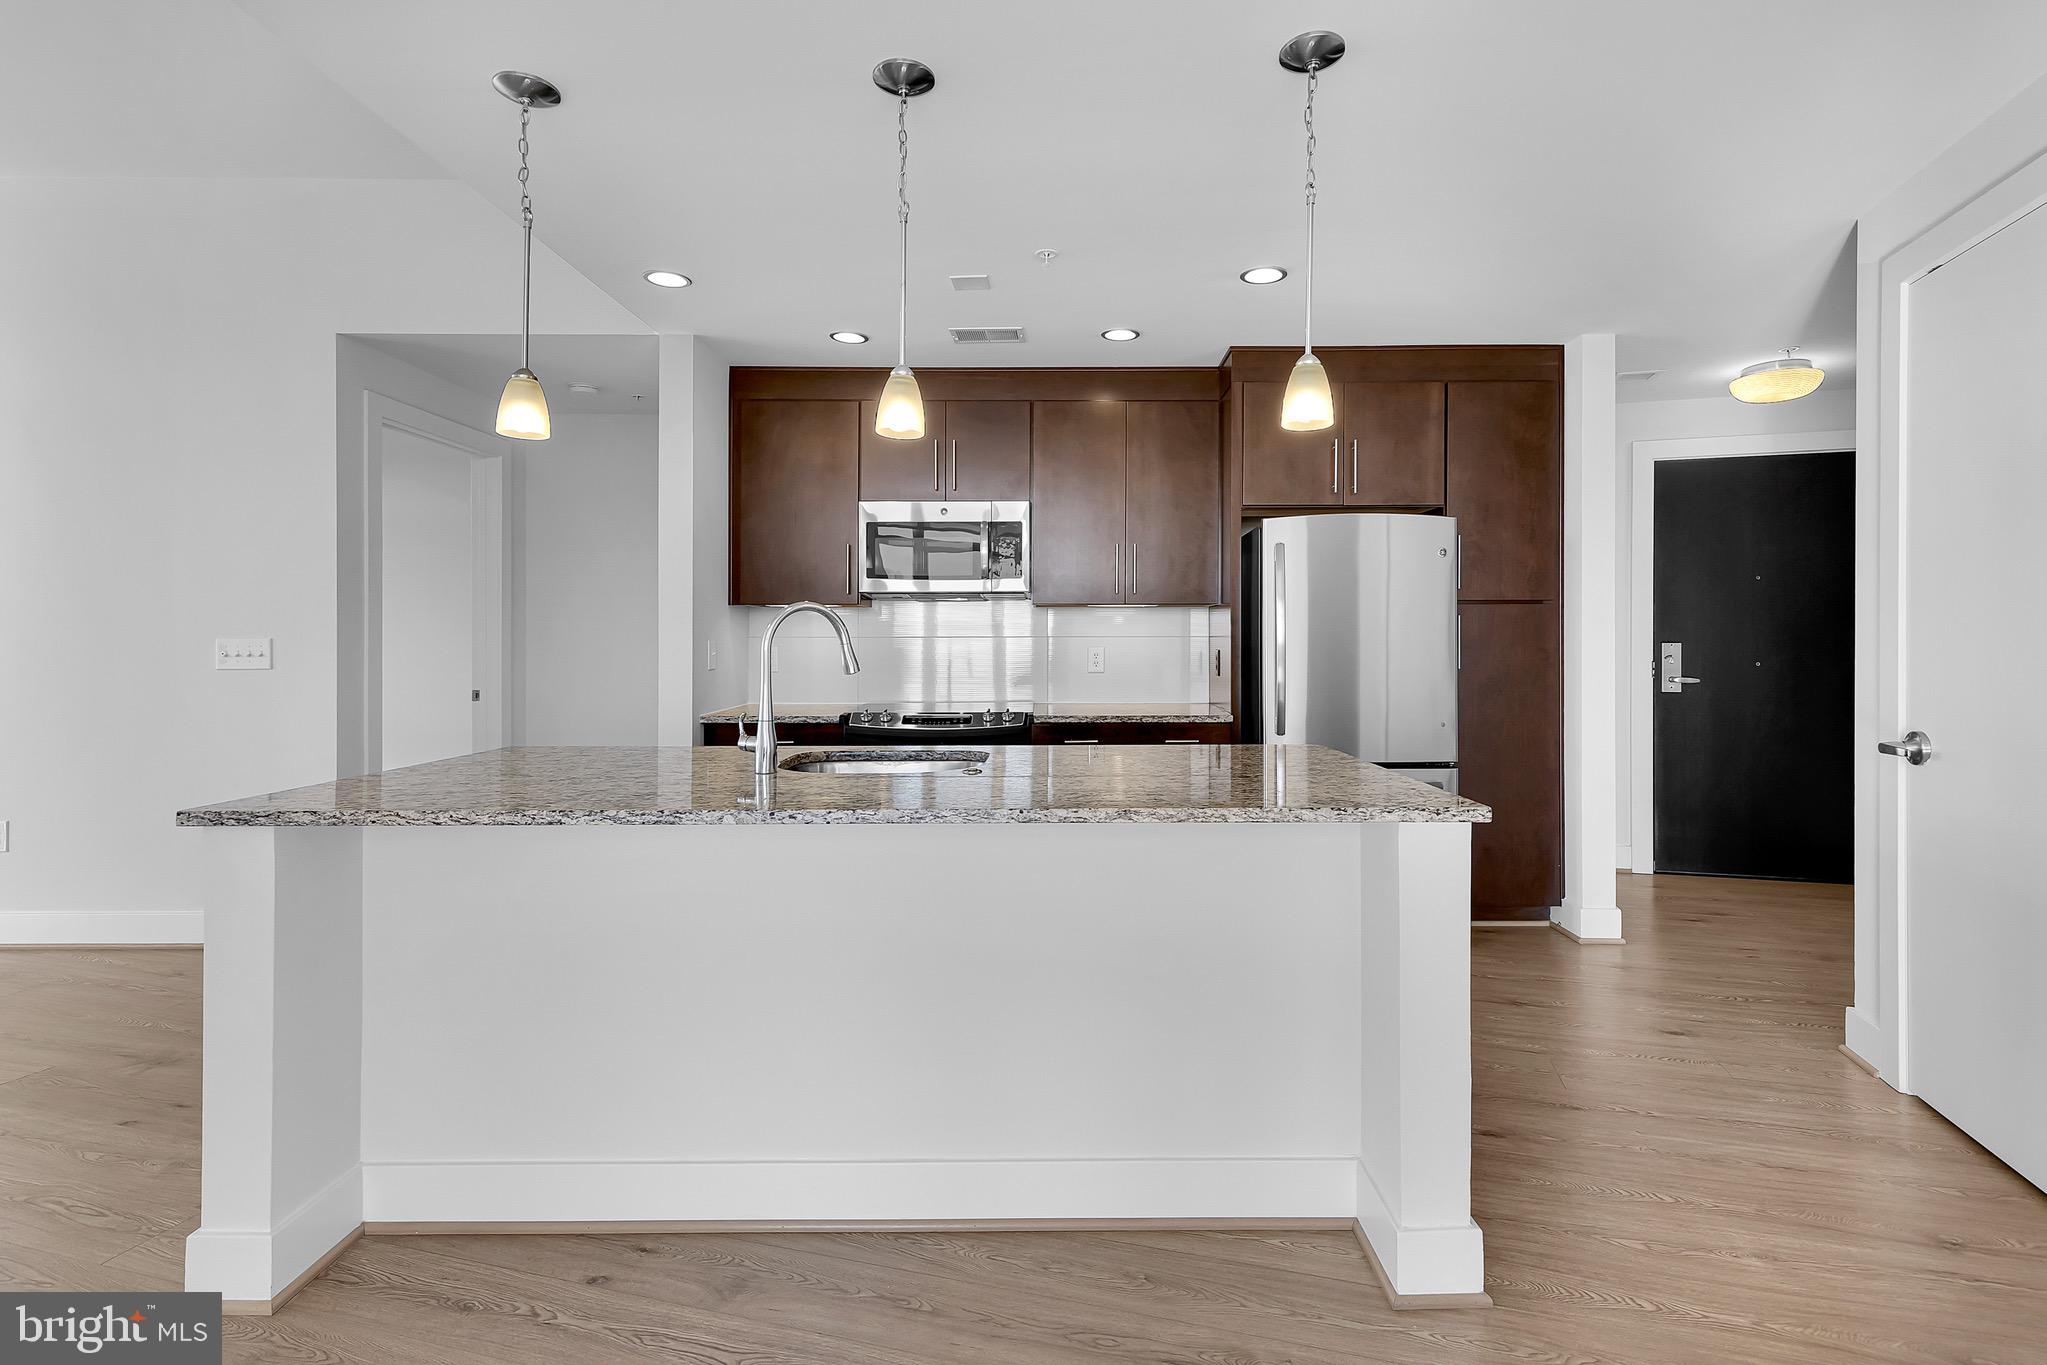 a view of a kitchen with kitchen island a counter top space stainless steel appliances and a ceiling fan